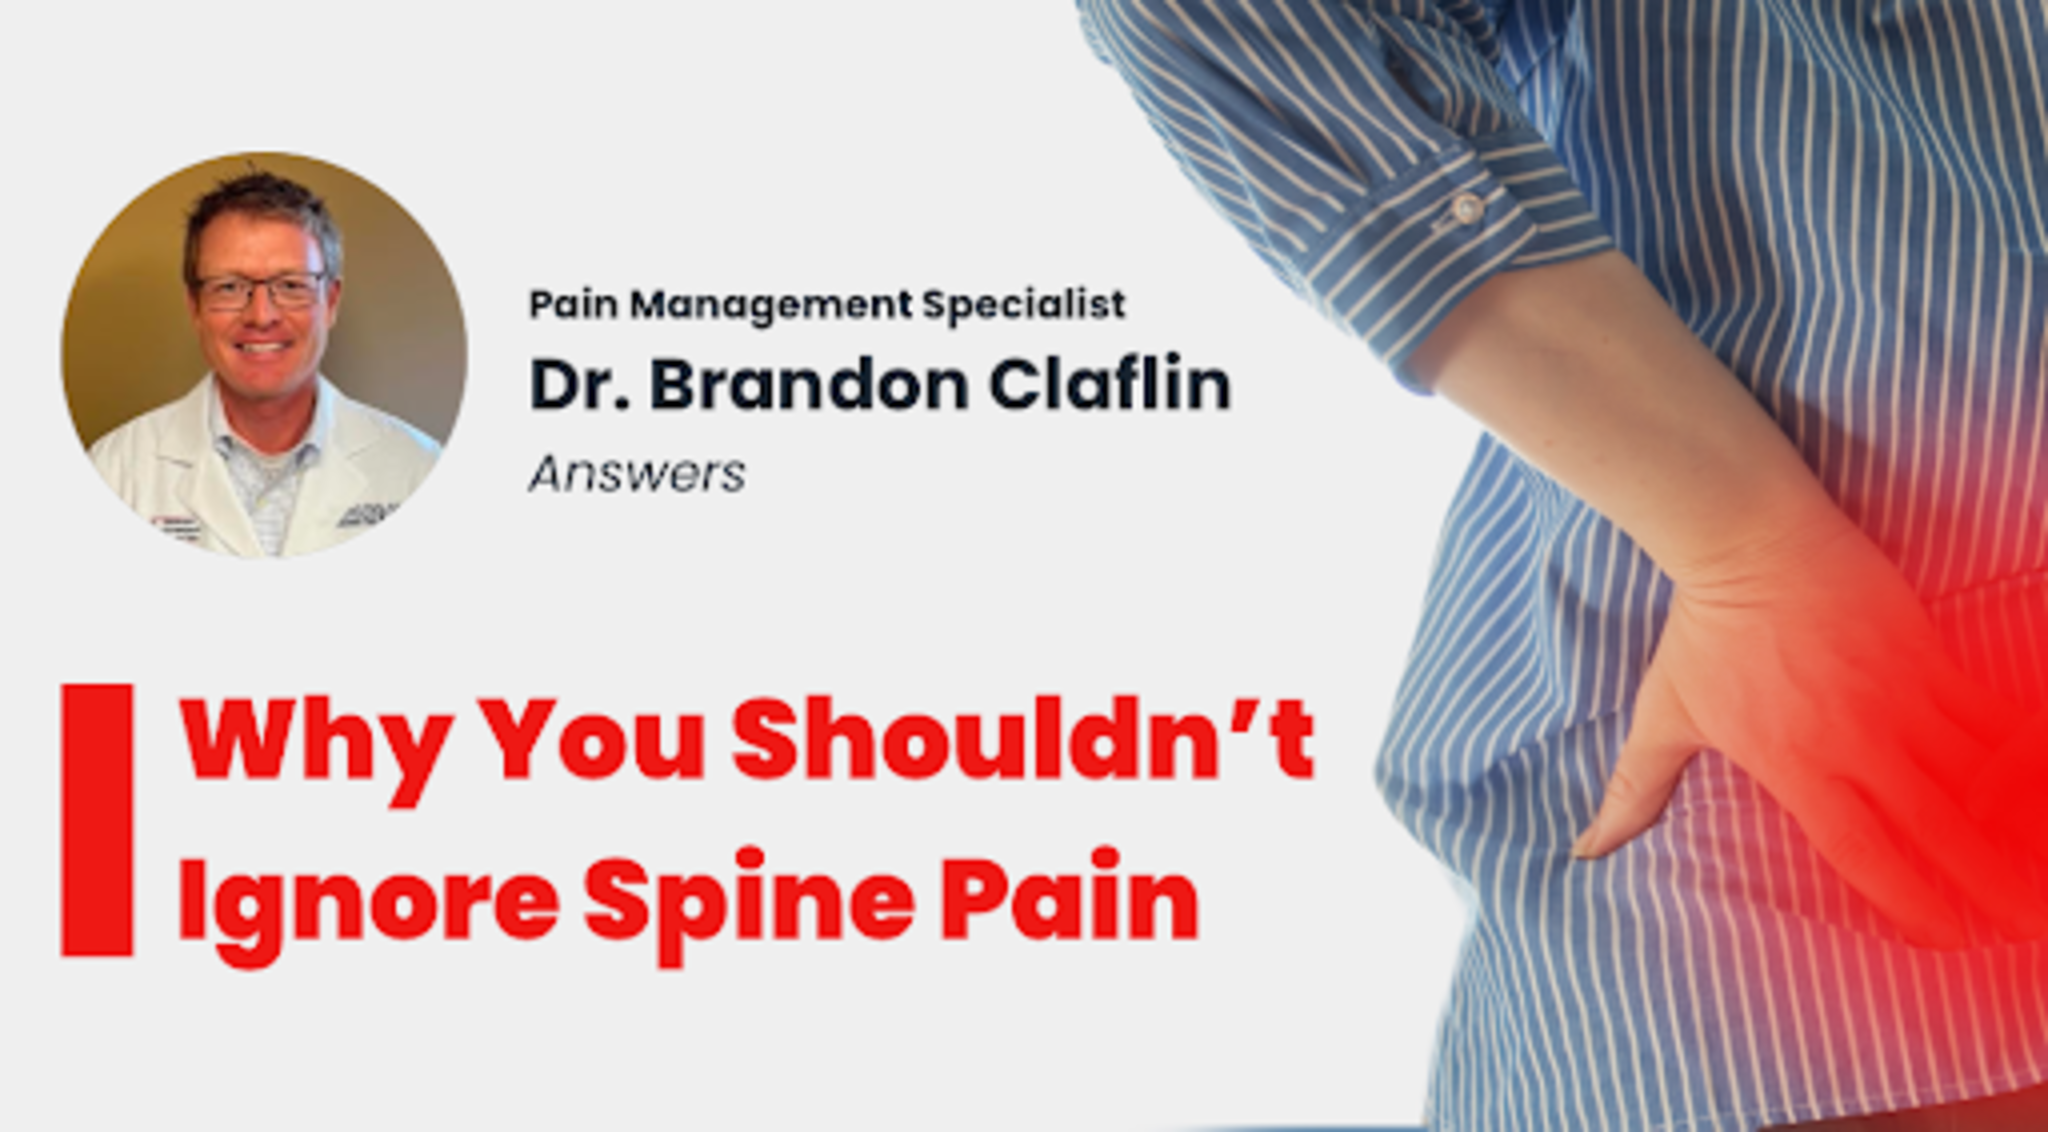 Dr. Brandon Claflin Of Oklahoma Answers Why You Shouldn't Ignore Spine Pain